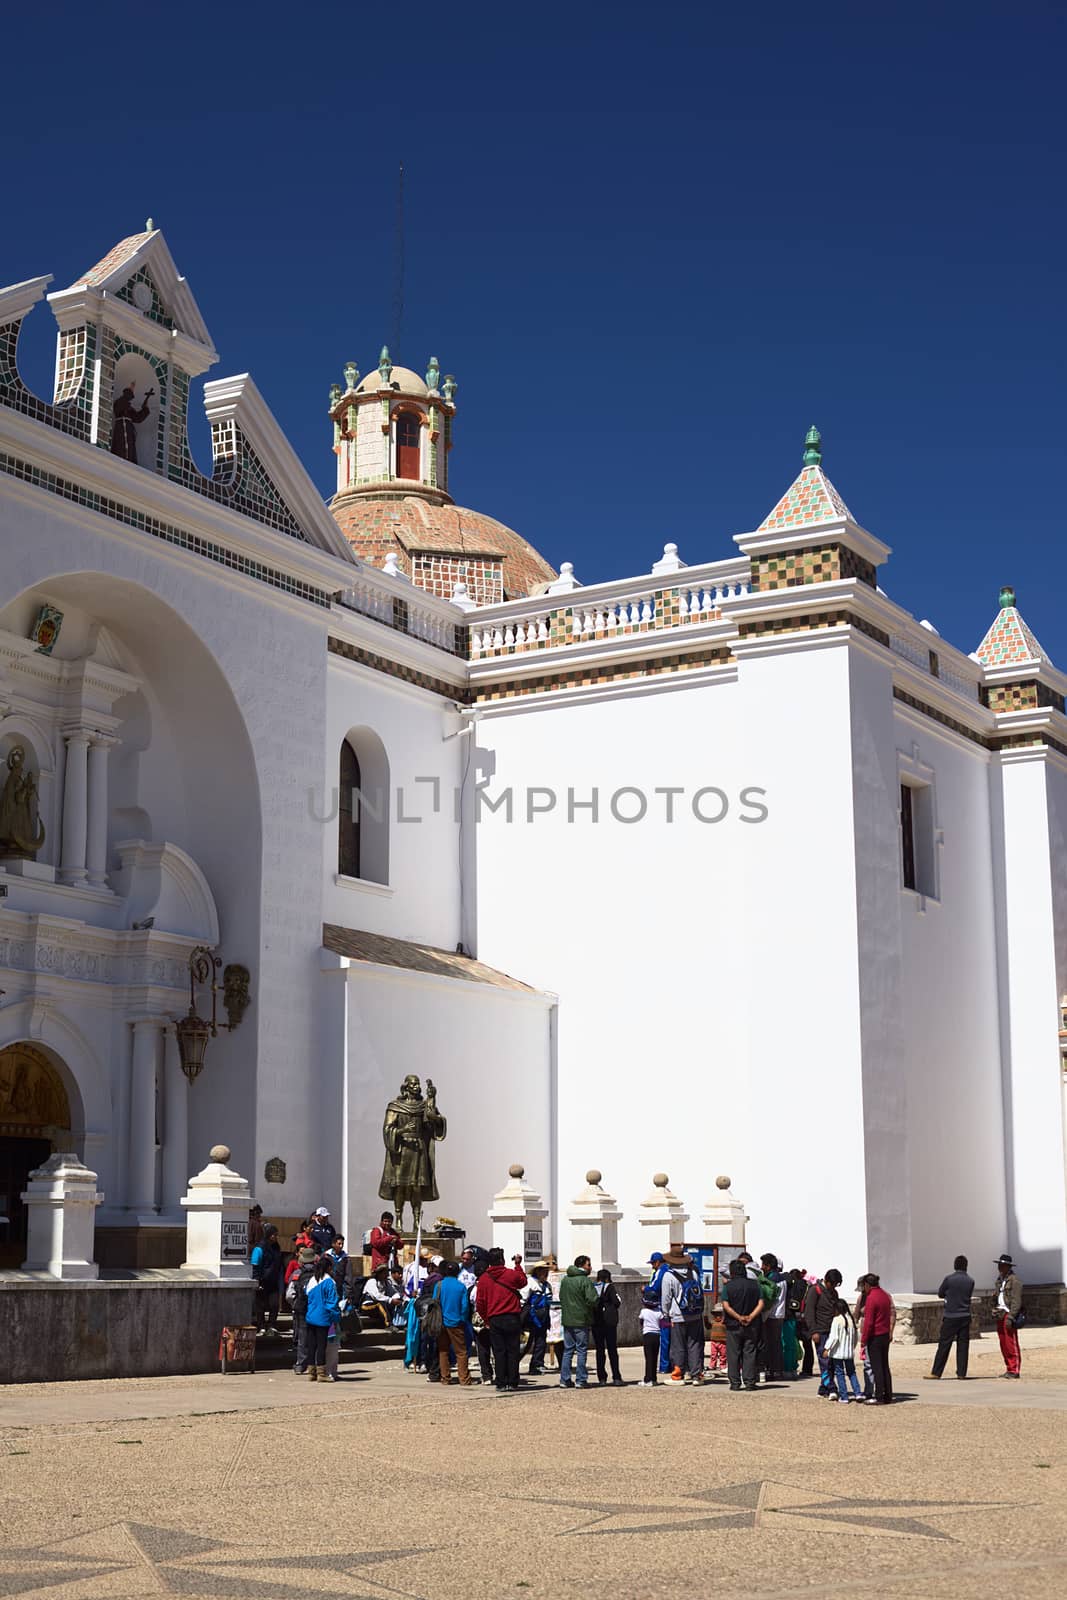 The Basilica of Our Lady of Copacabana in Bolivia by sven